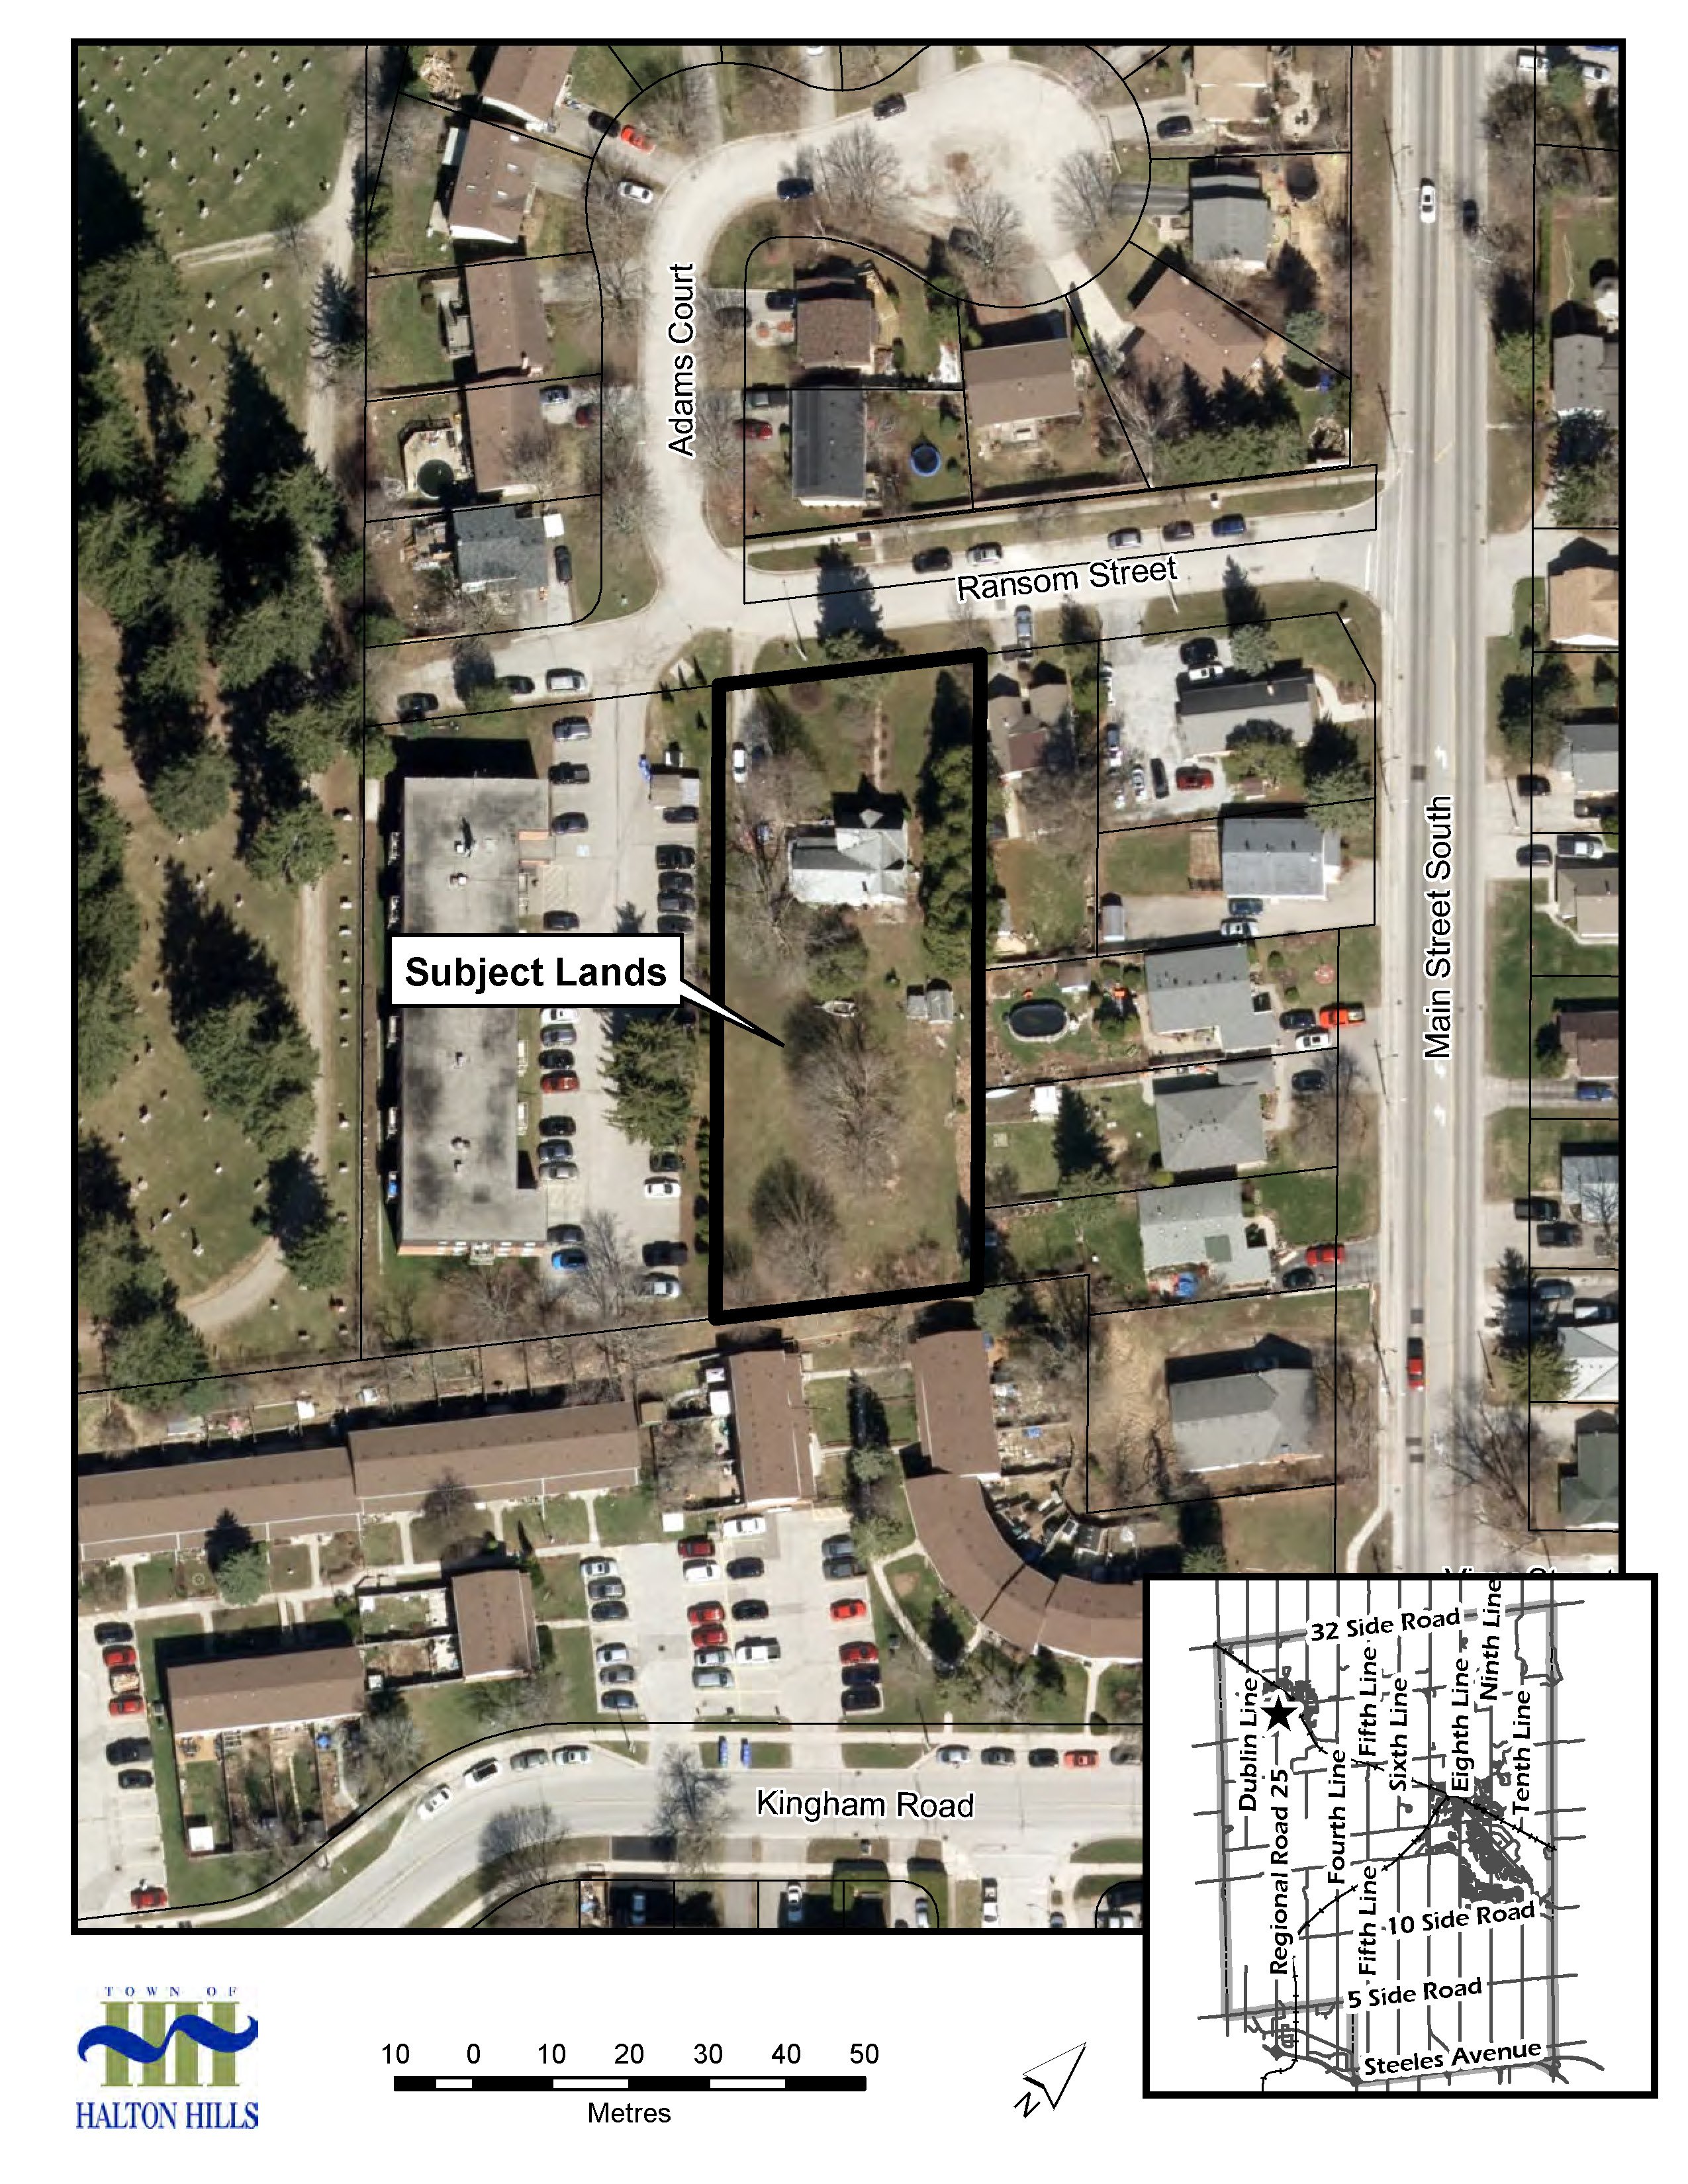 Orthophoto map showing location of 20 Ransom Street